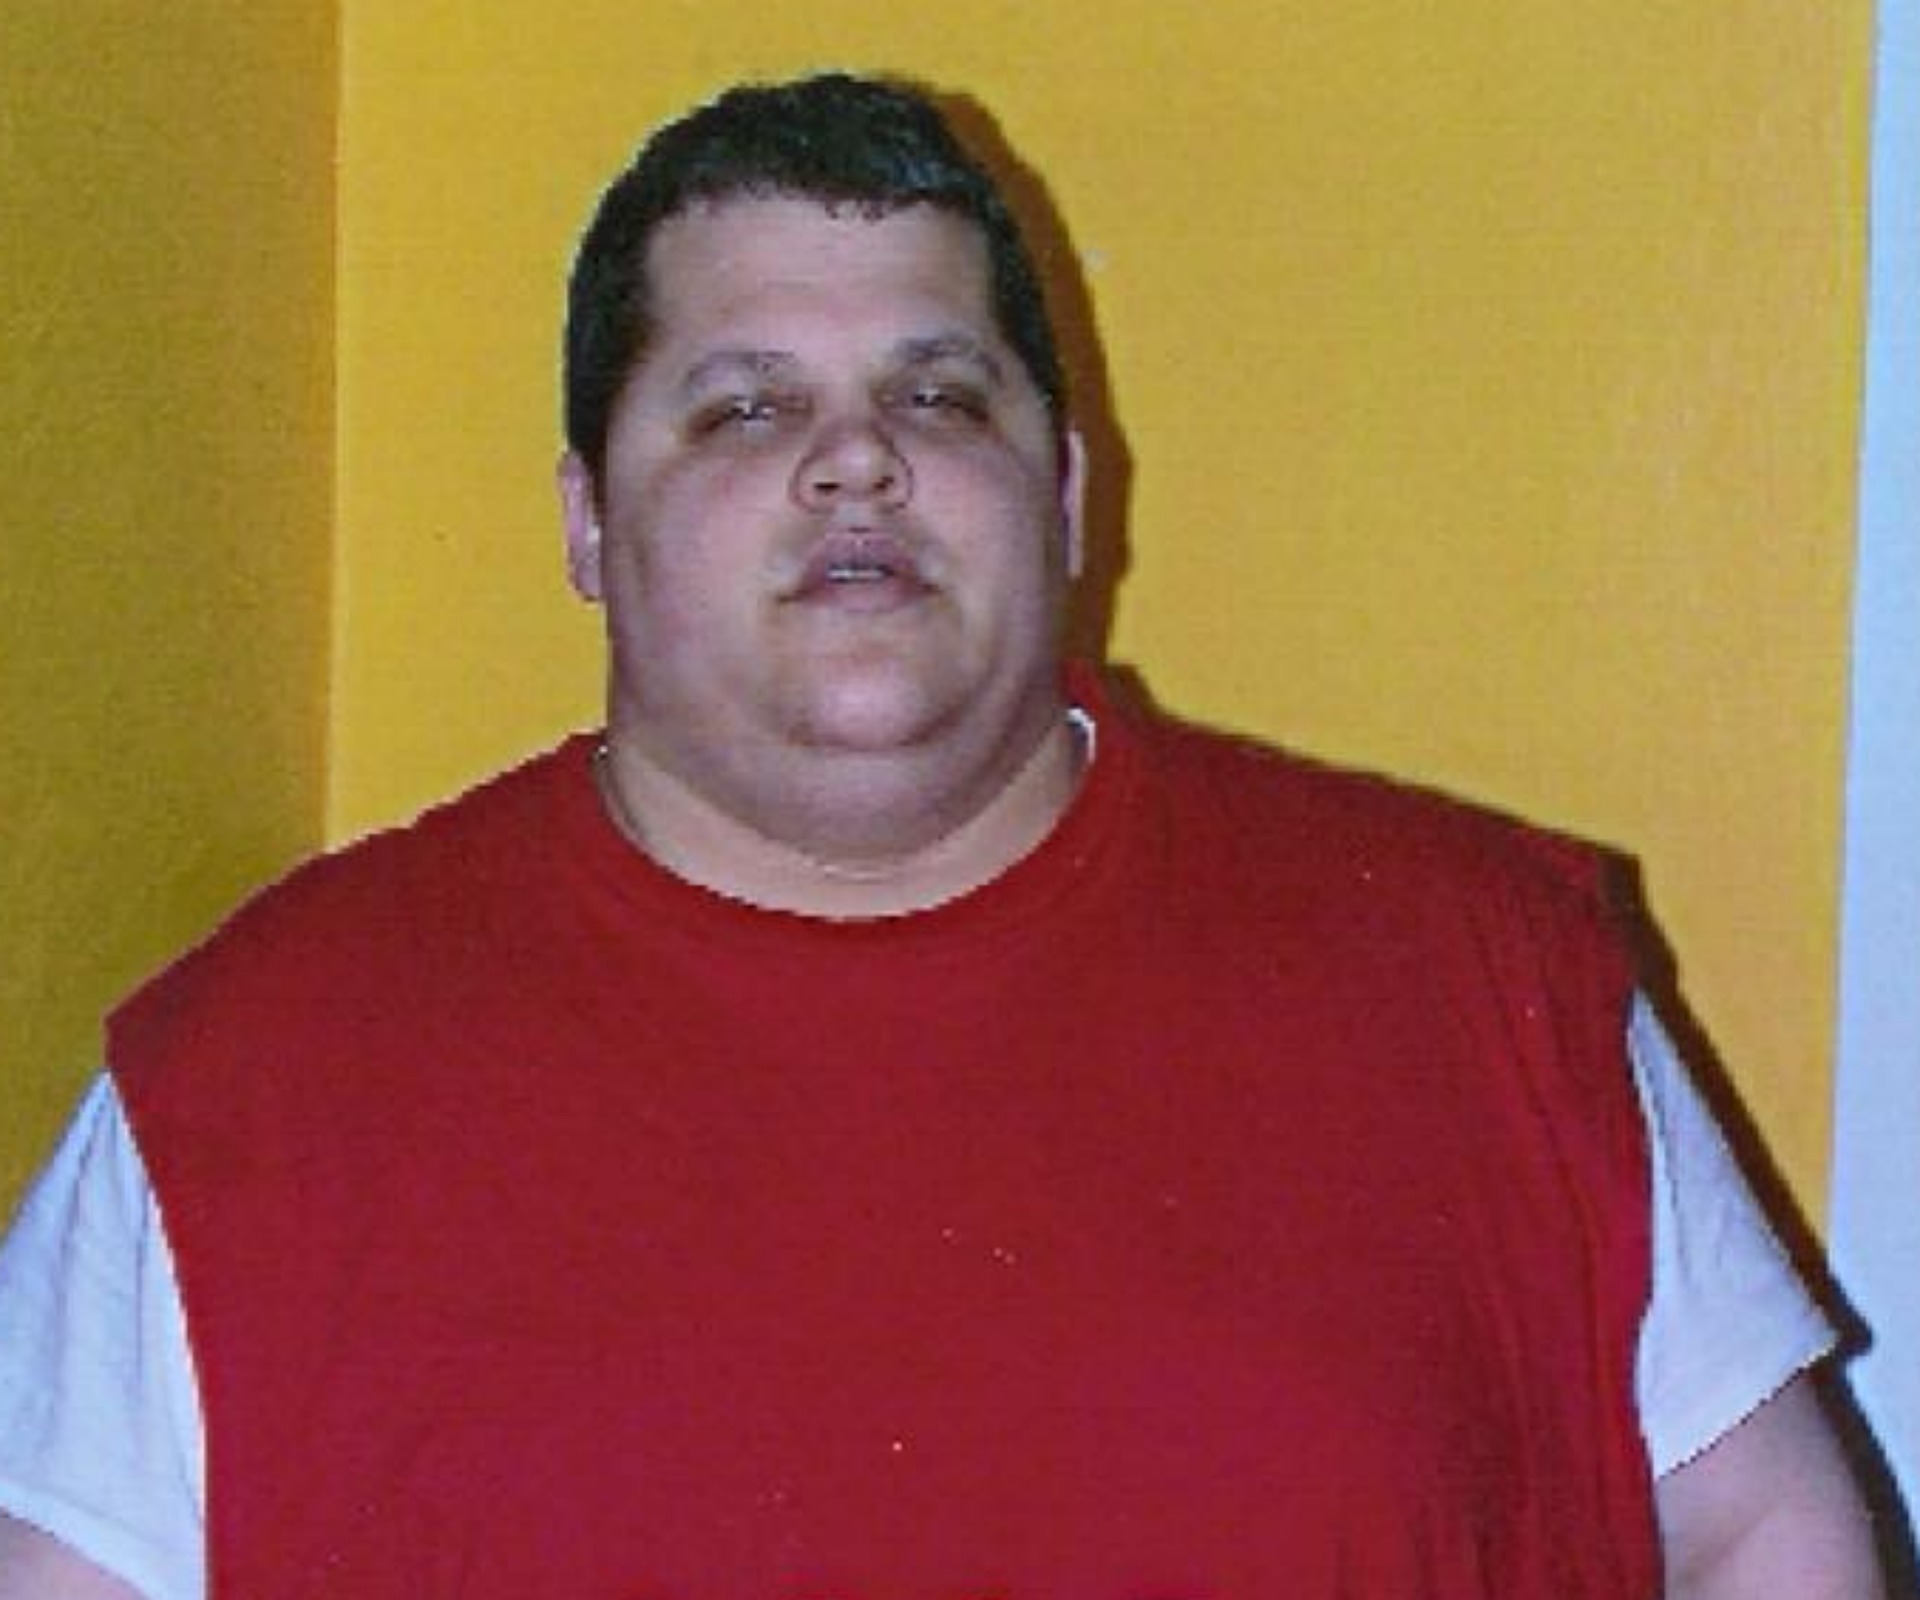 Obese man almost unrecognisable after amazing 10-month weight-loss